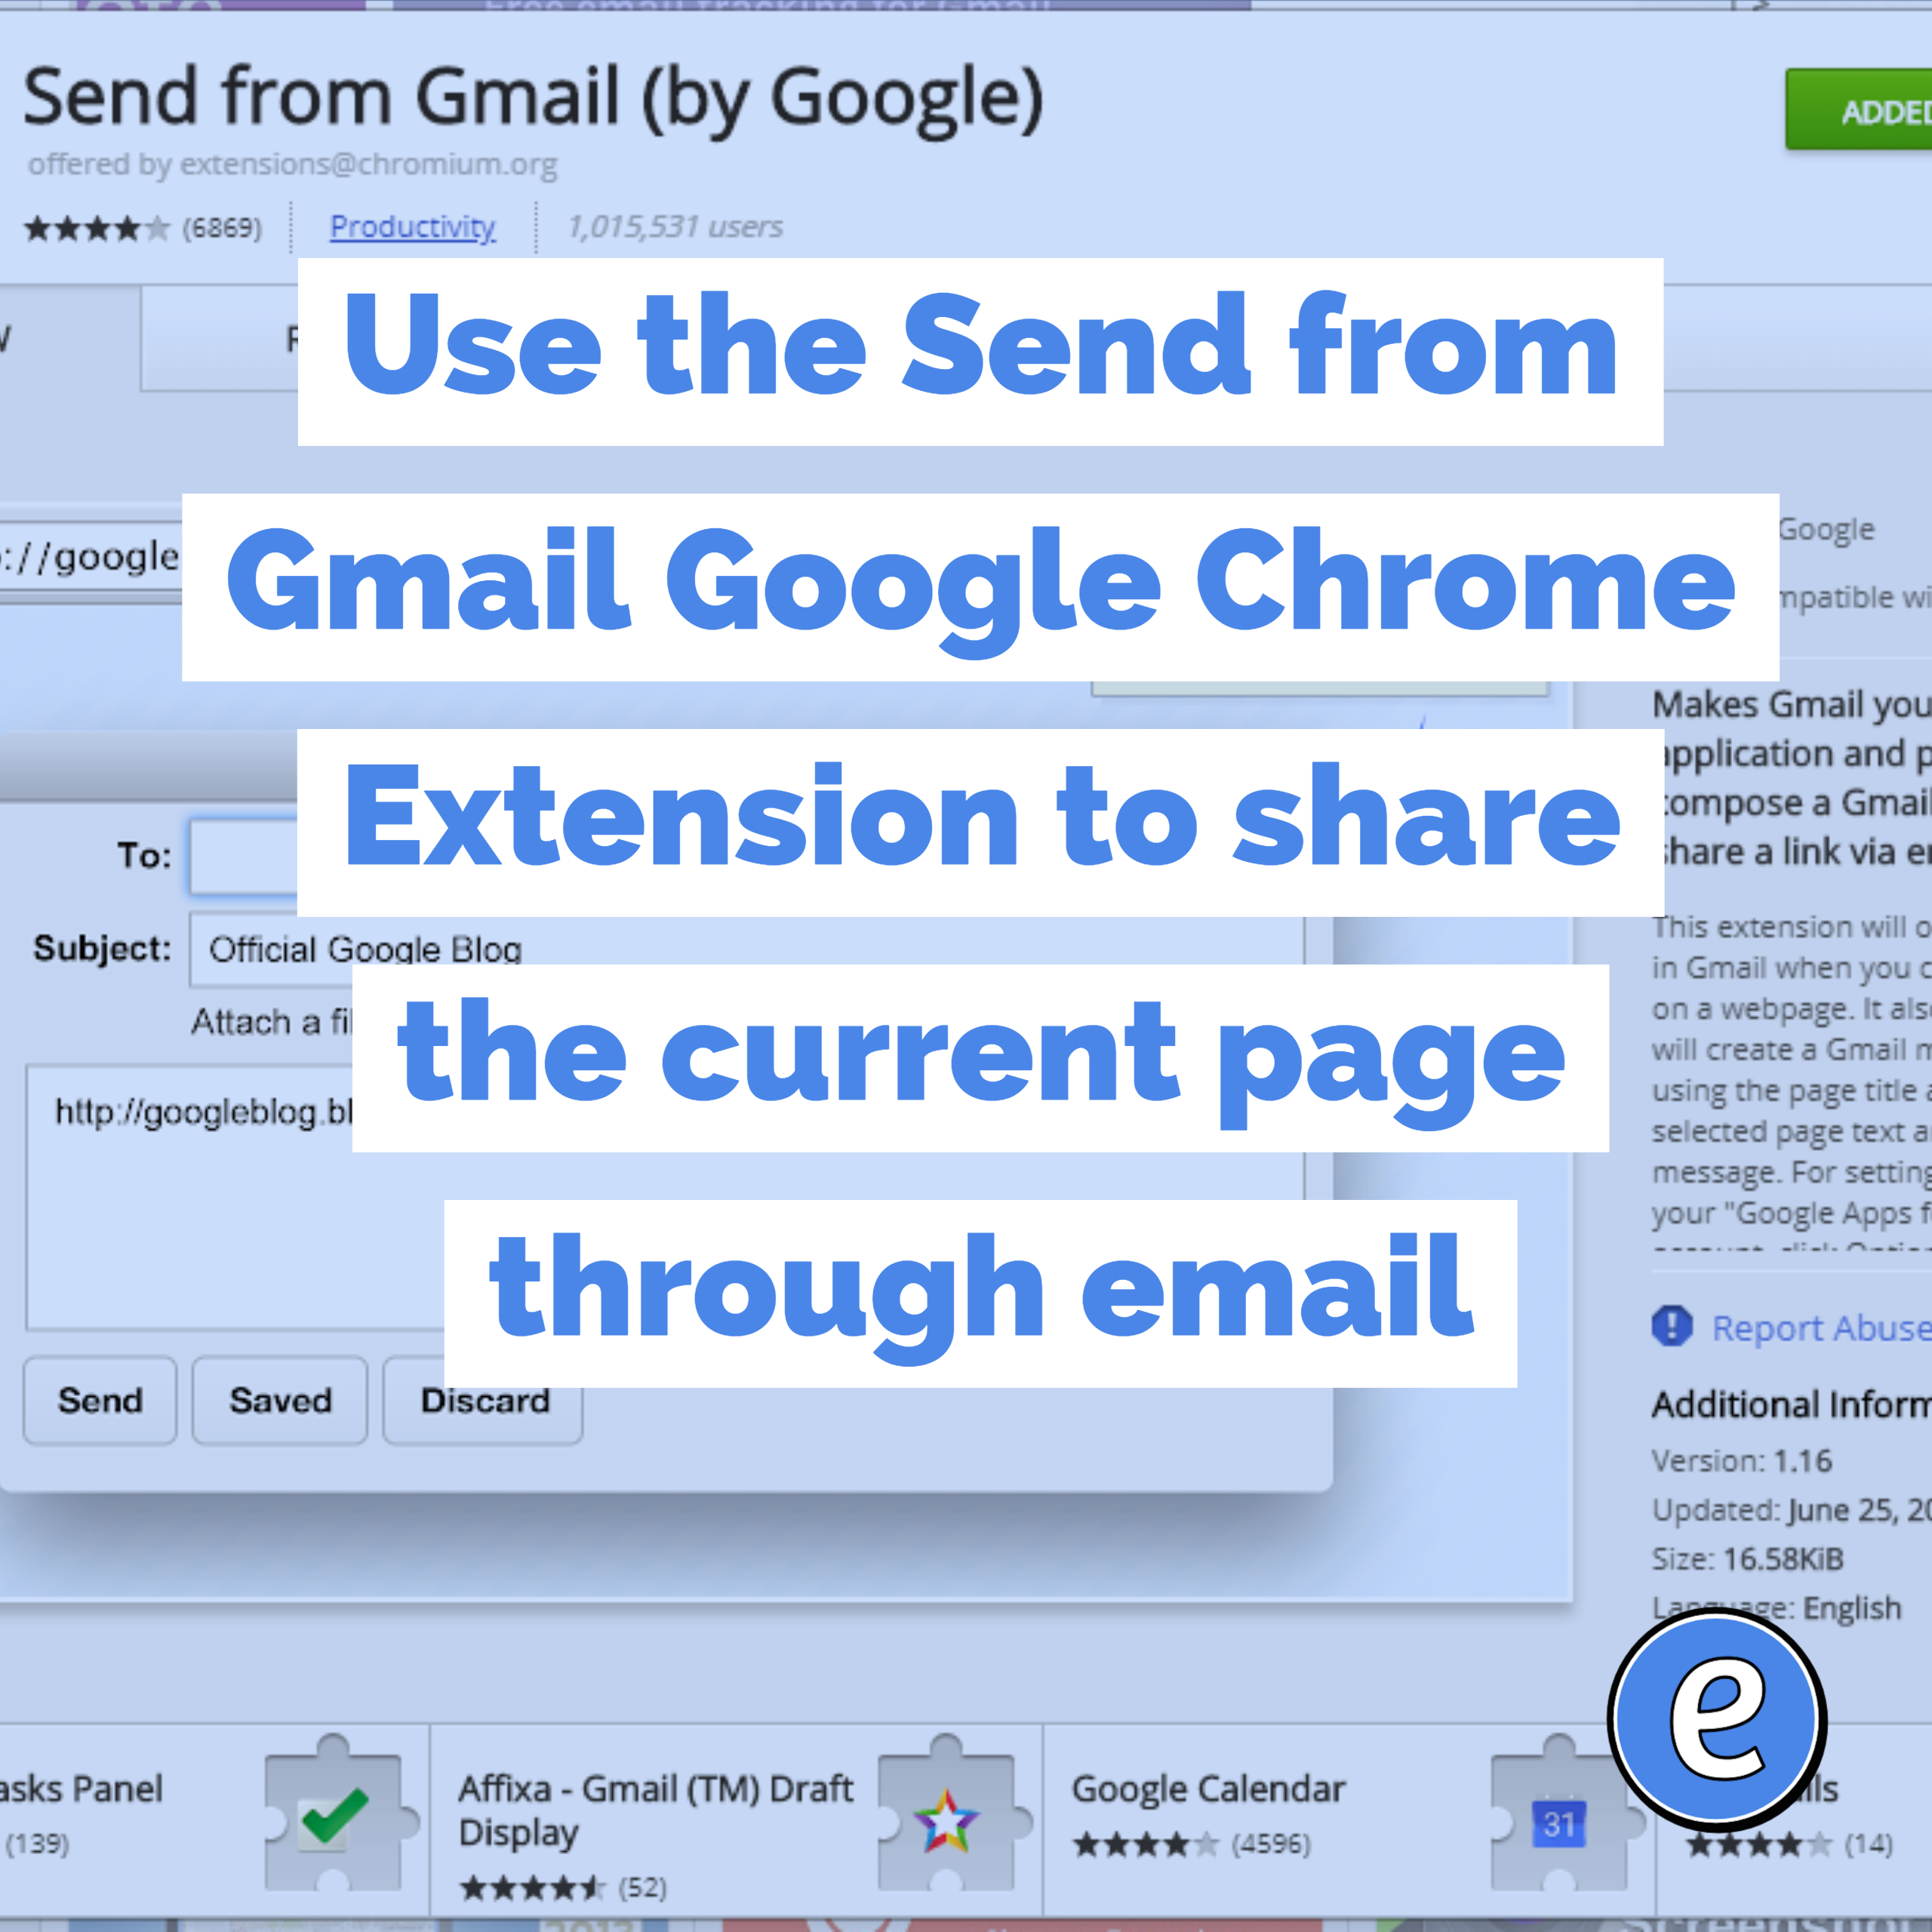 Use the Send from Gmail Google Chrome Extension to share the current page through email